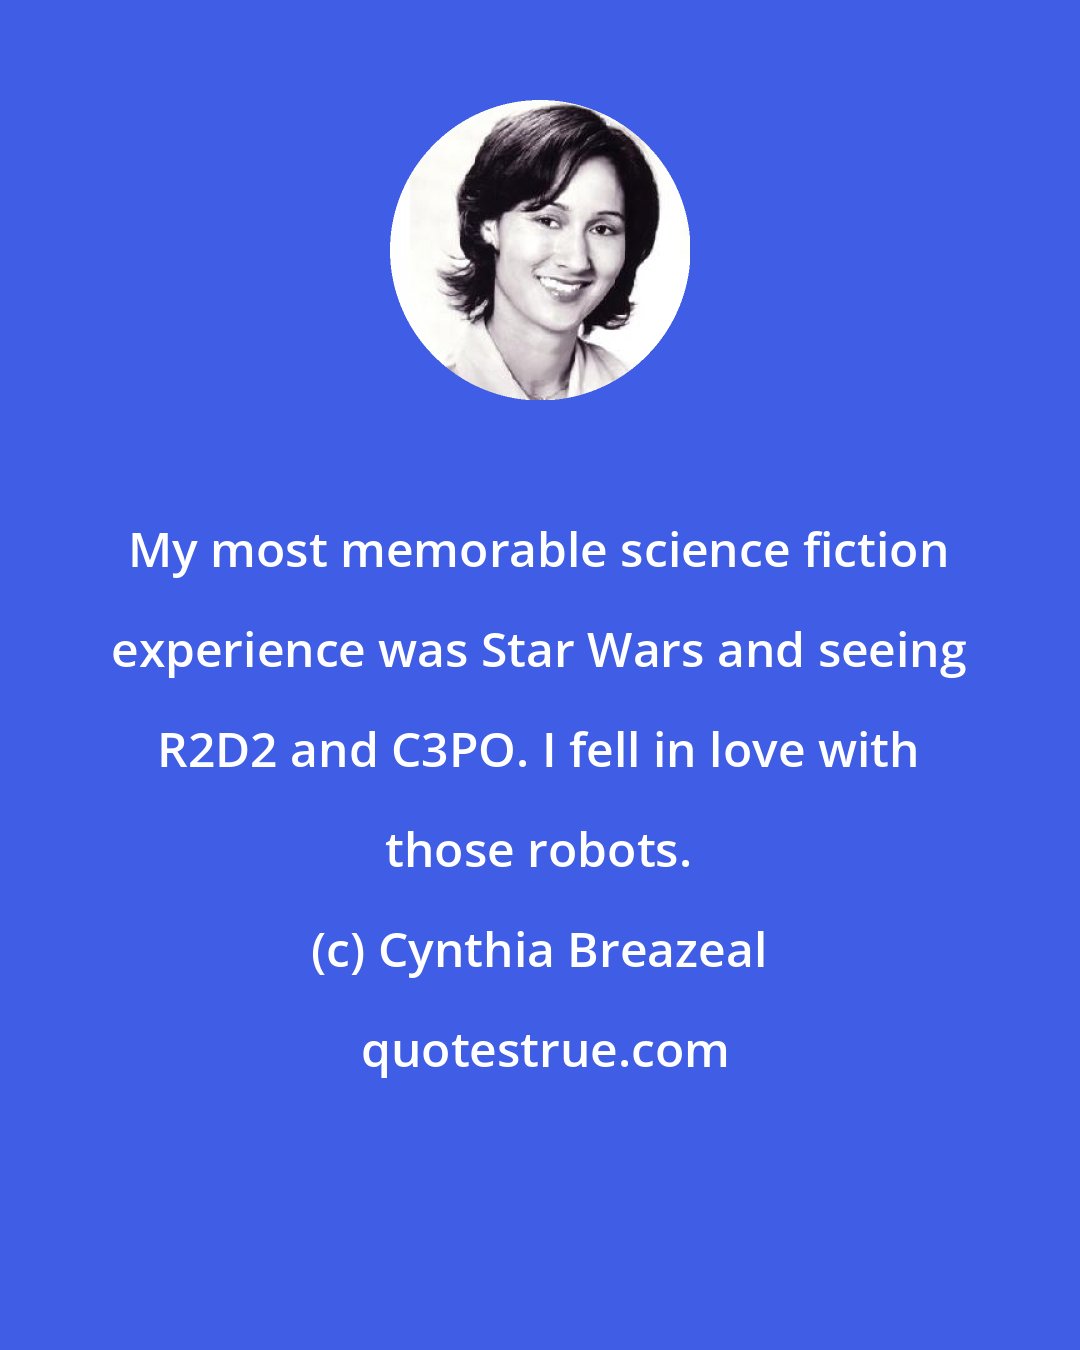 Cynthia Breazeal: My most memorable science fiction experience was Star Wars and seeing R2D2 and C3PO. I fell in love with those robots.